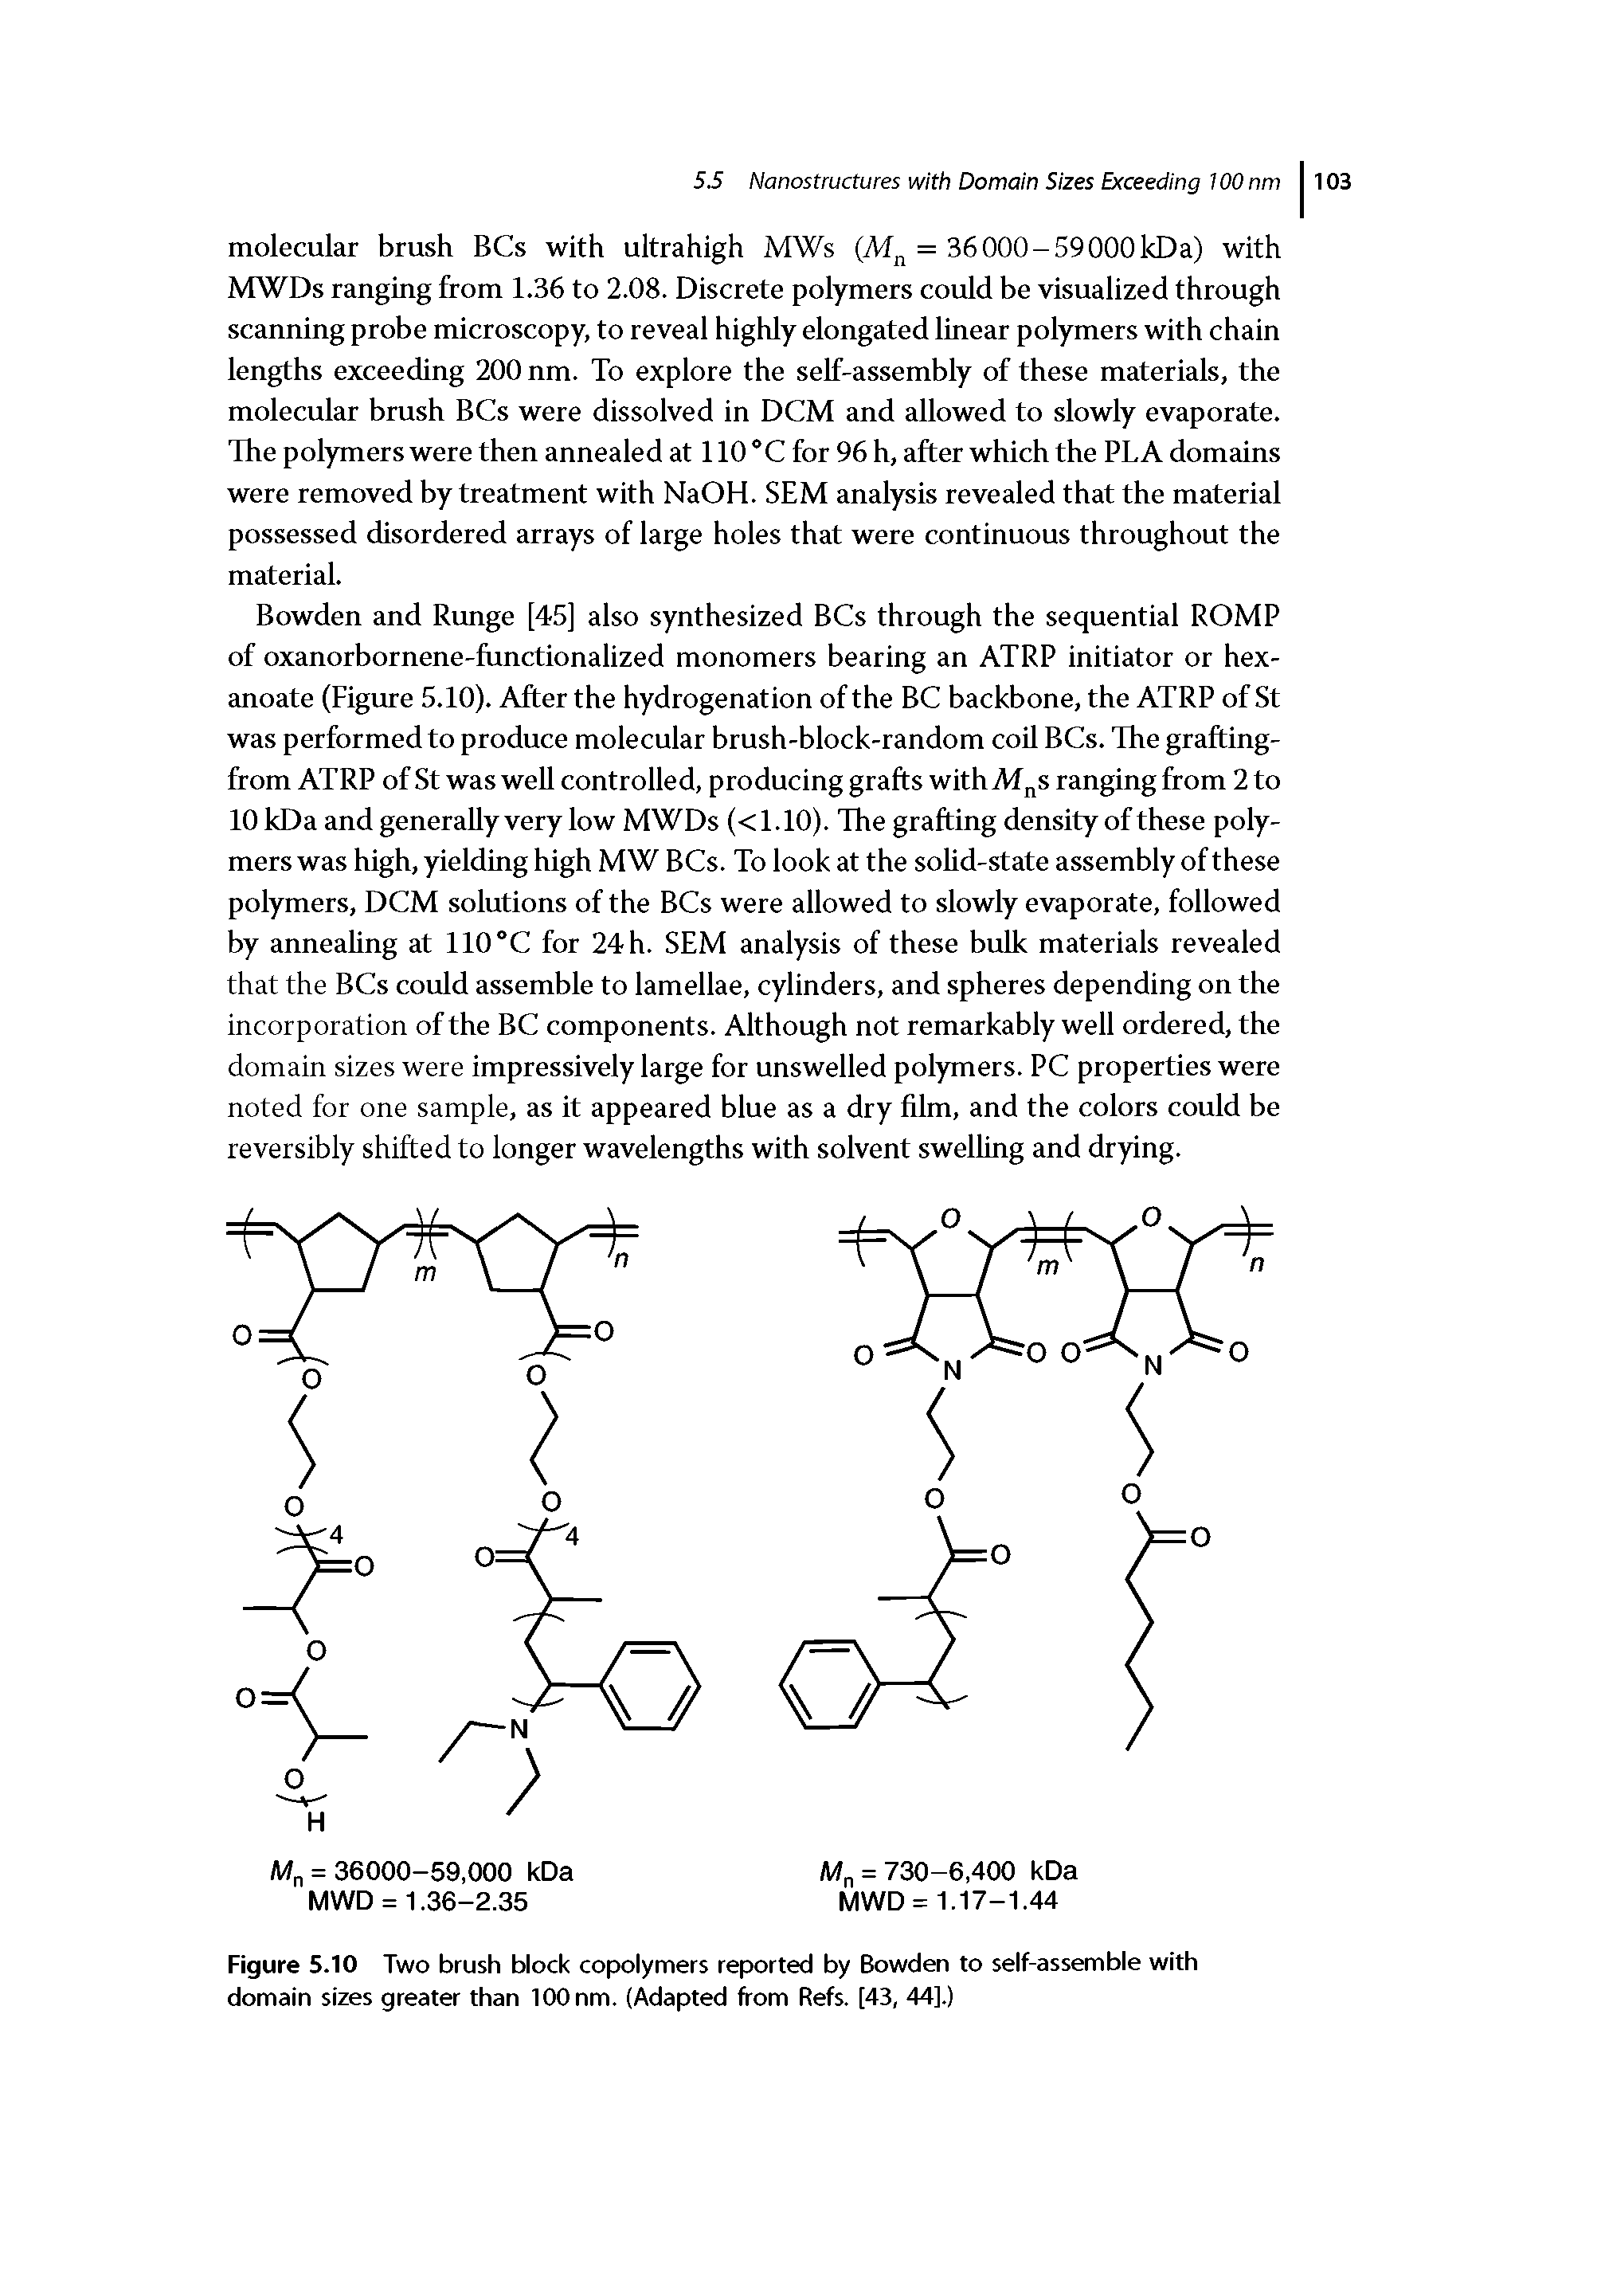 Figure 5.10 Two brush block copolymers reported by Bowden to self-assemble with domain sizes greater than 100 nm. (Adapted from Refs. [43, 44].)...